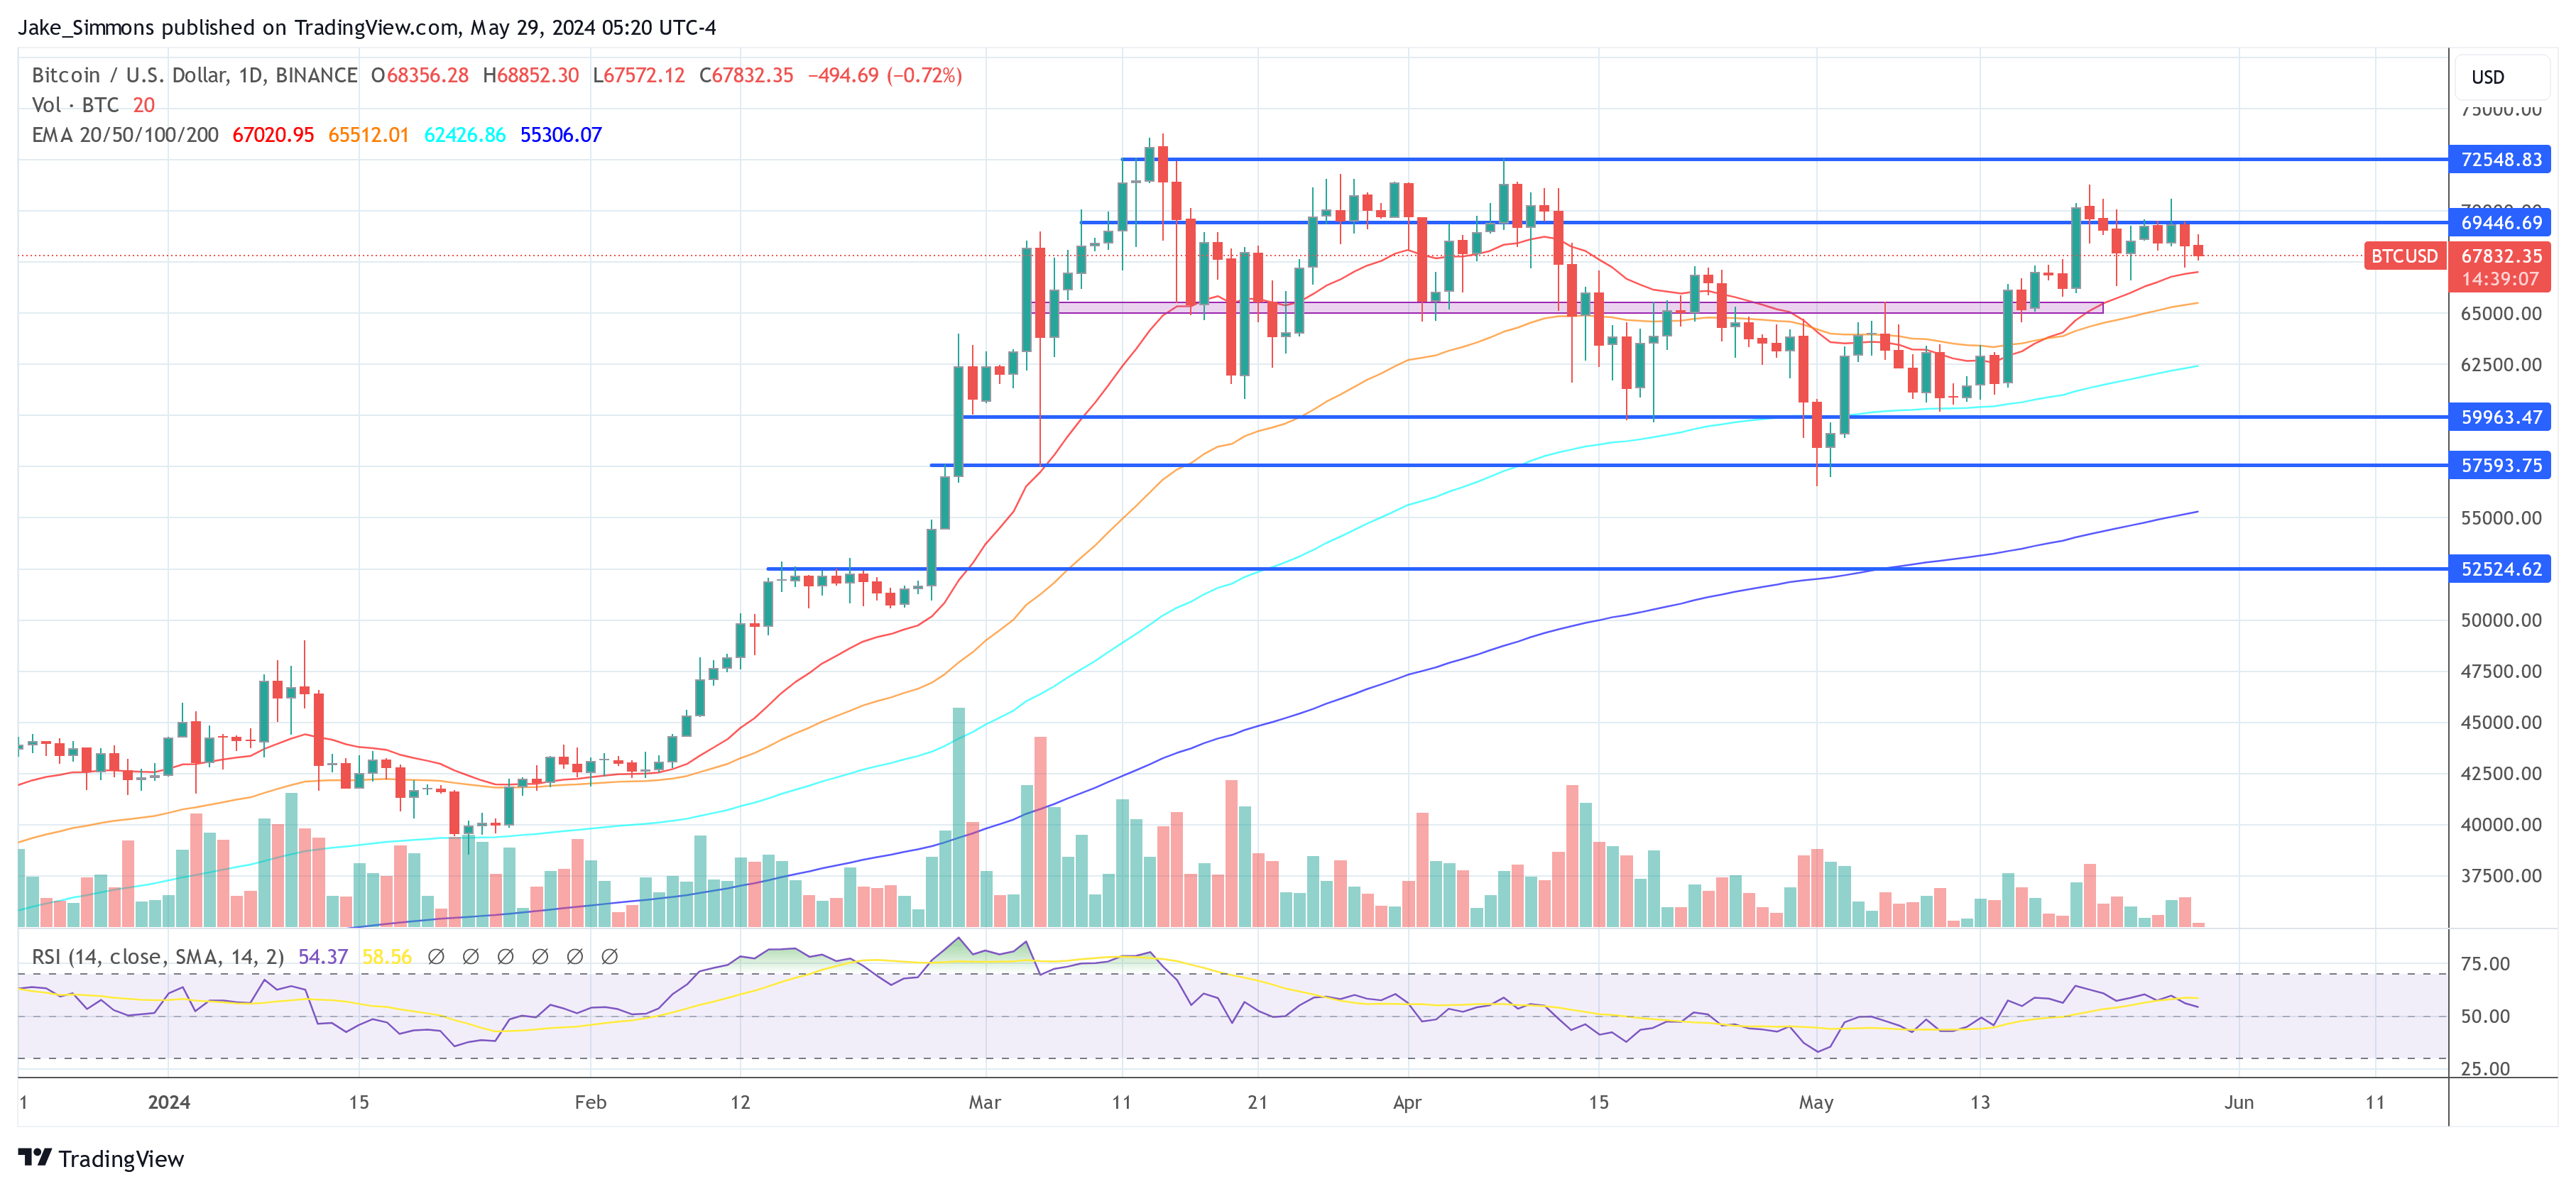 Whales Push Bitcoin Into Narrow Consolidation Range: What To Expect Next